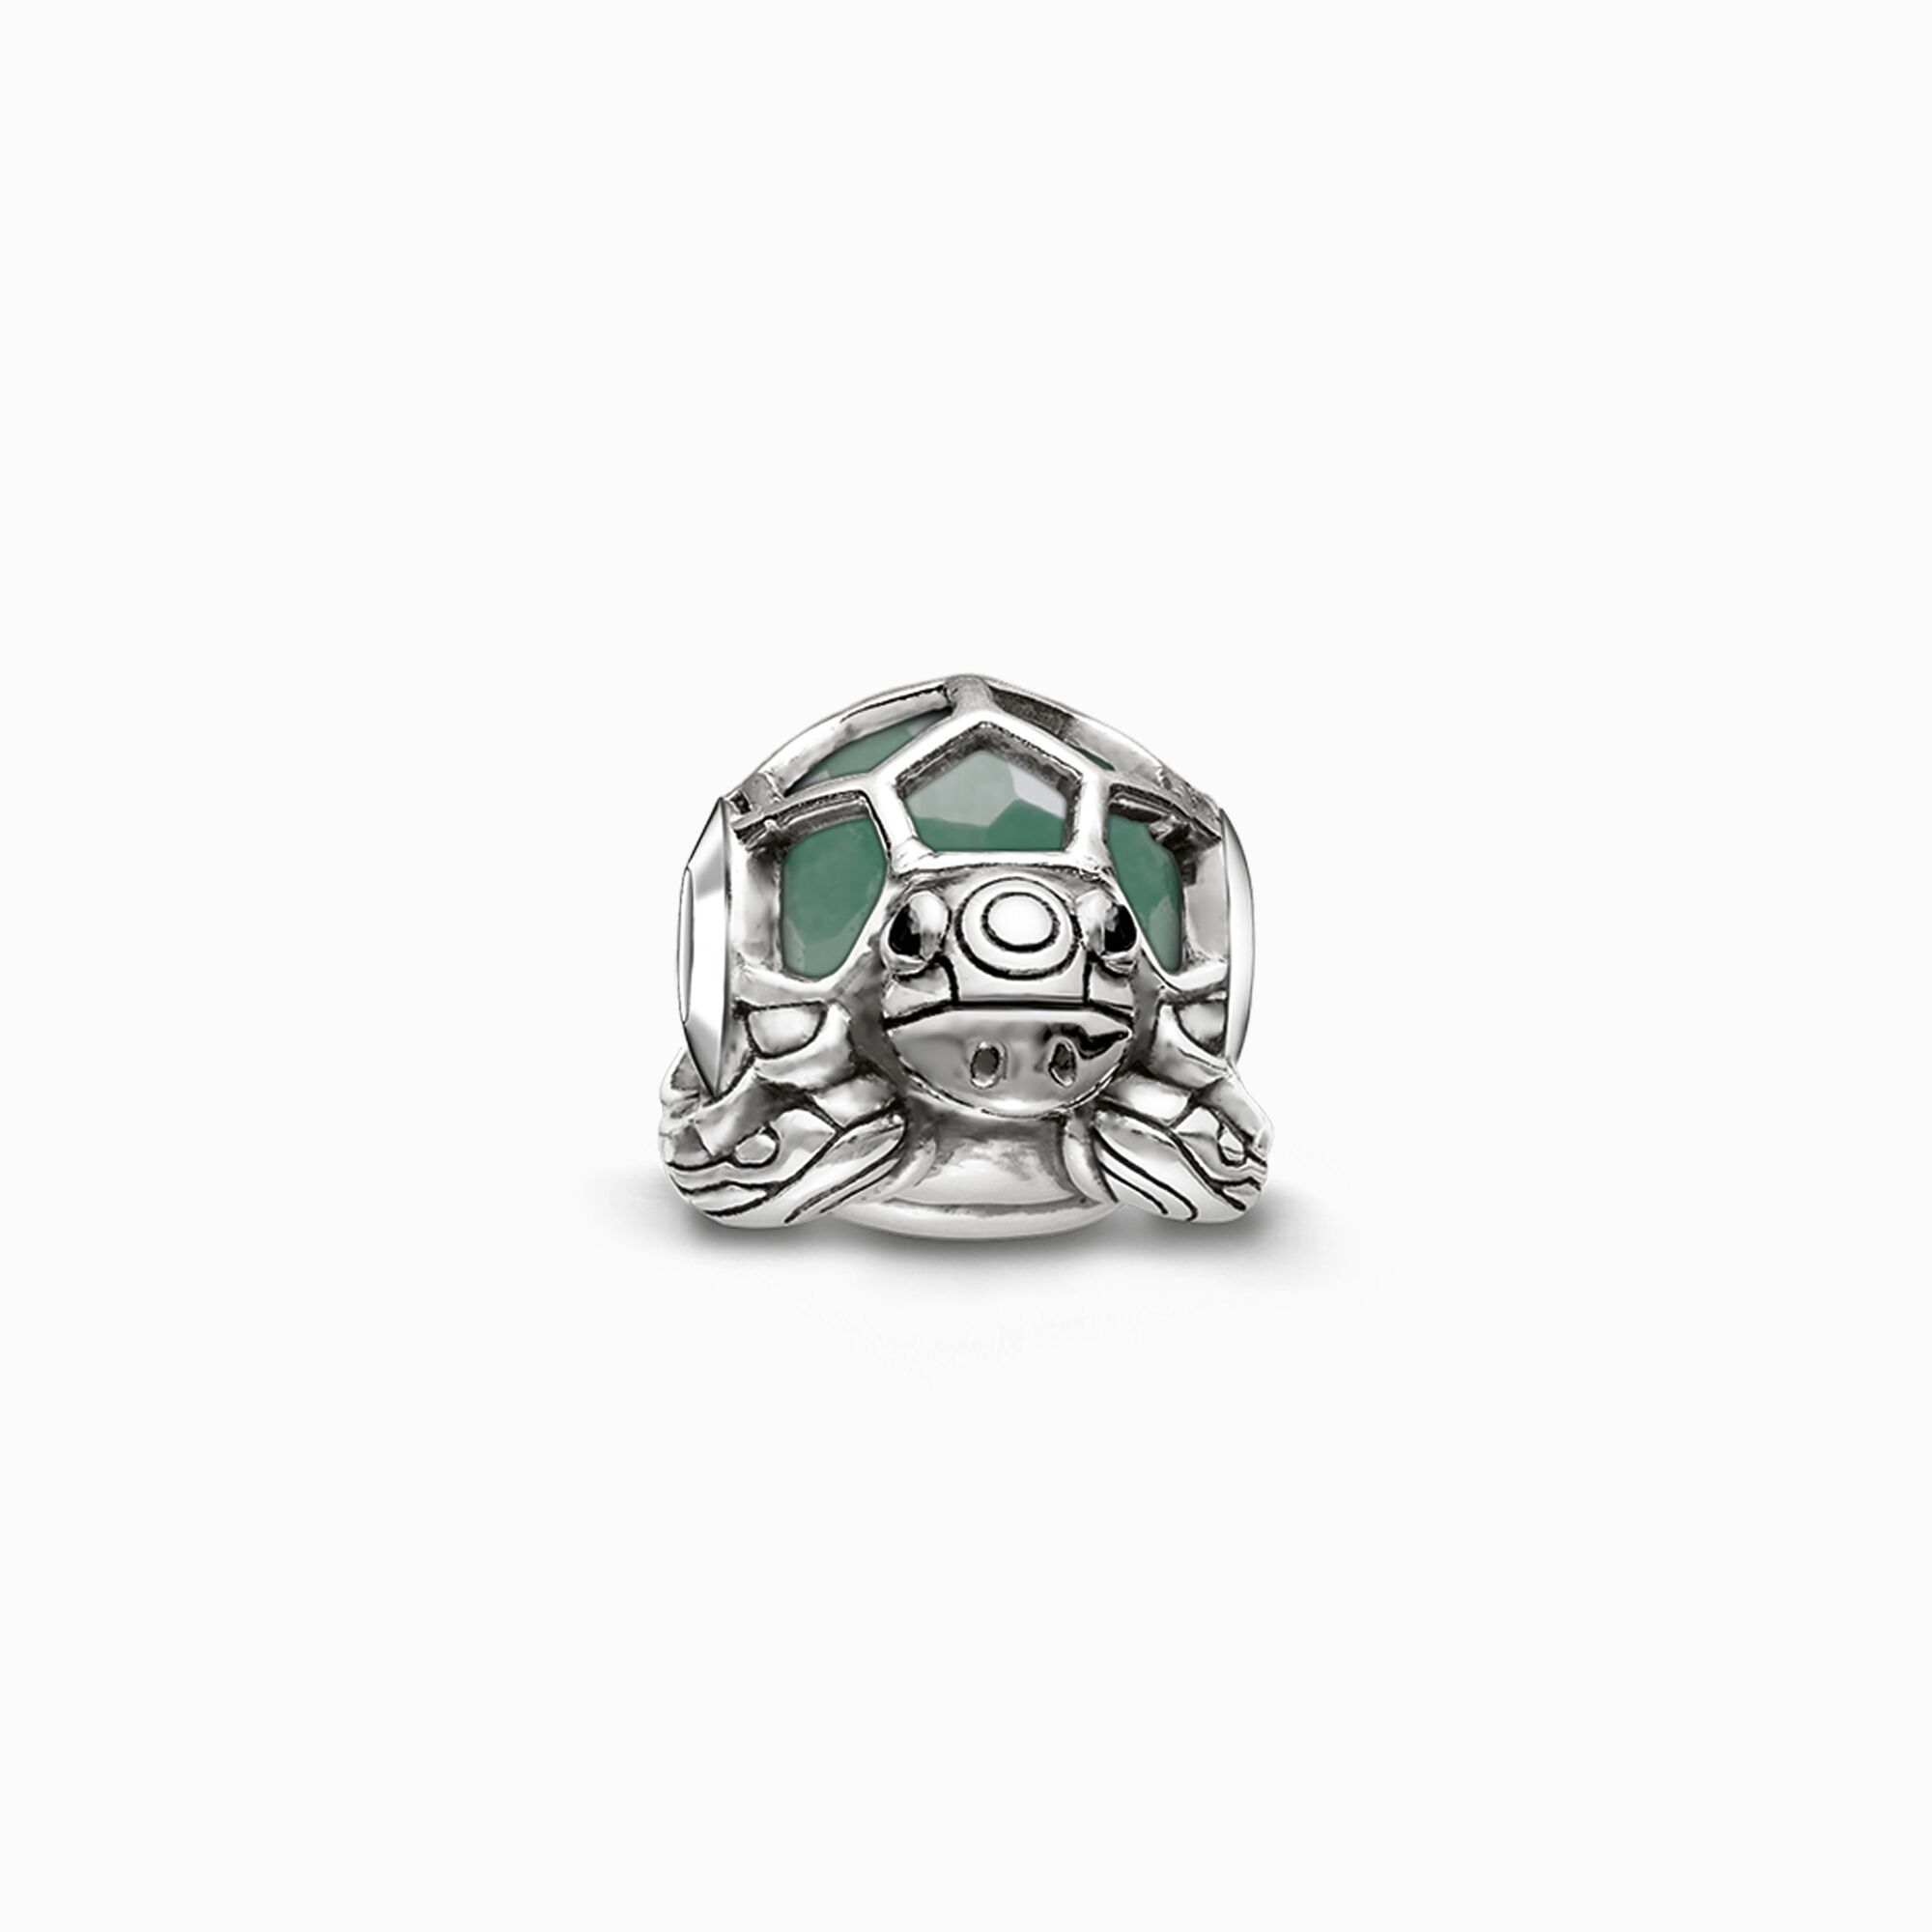 Bead turtle from the Karma Beads collection in the THOMAS SABO online store